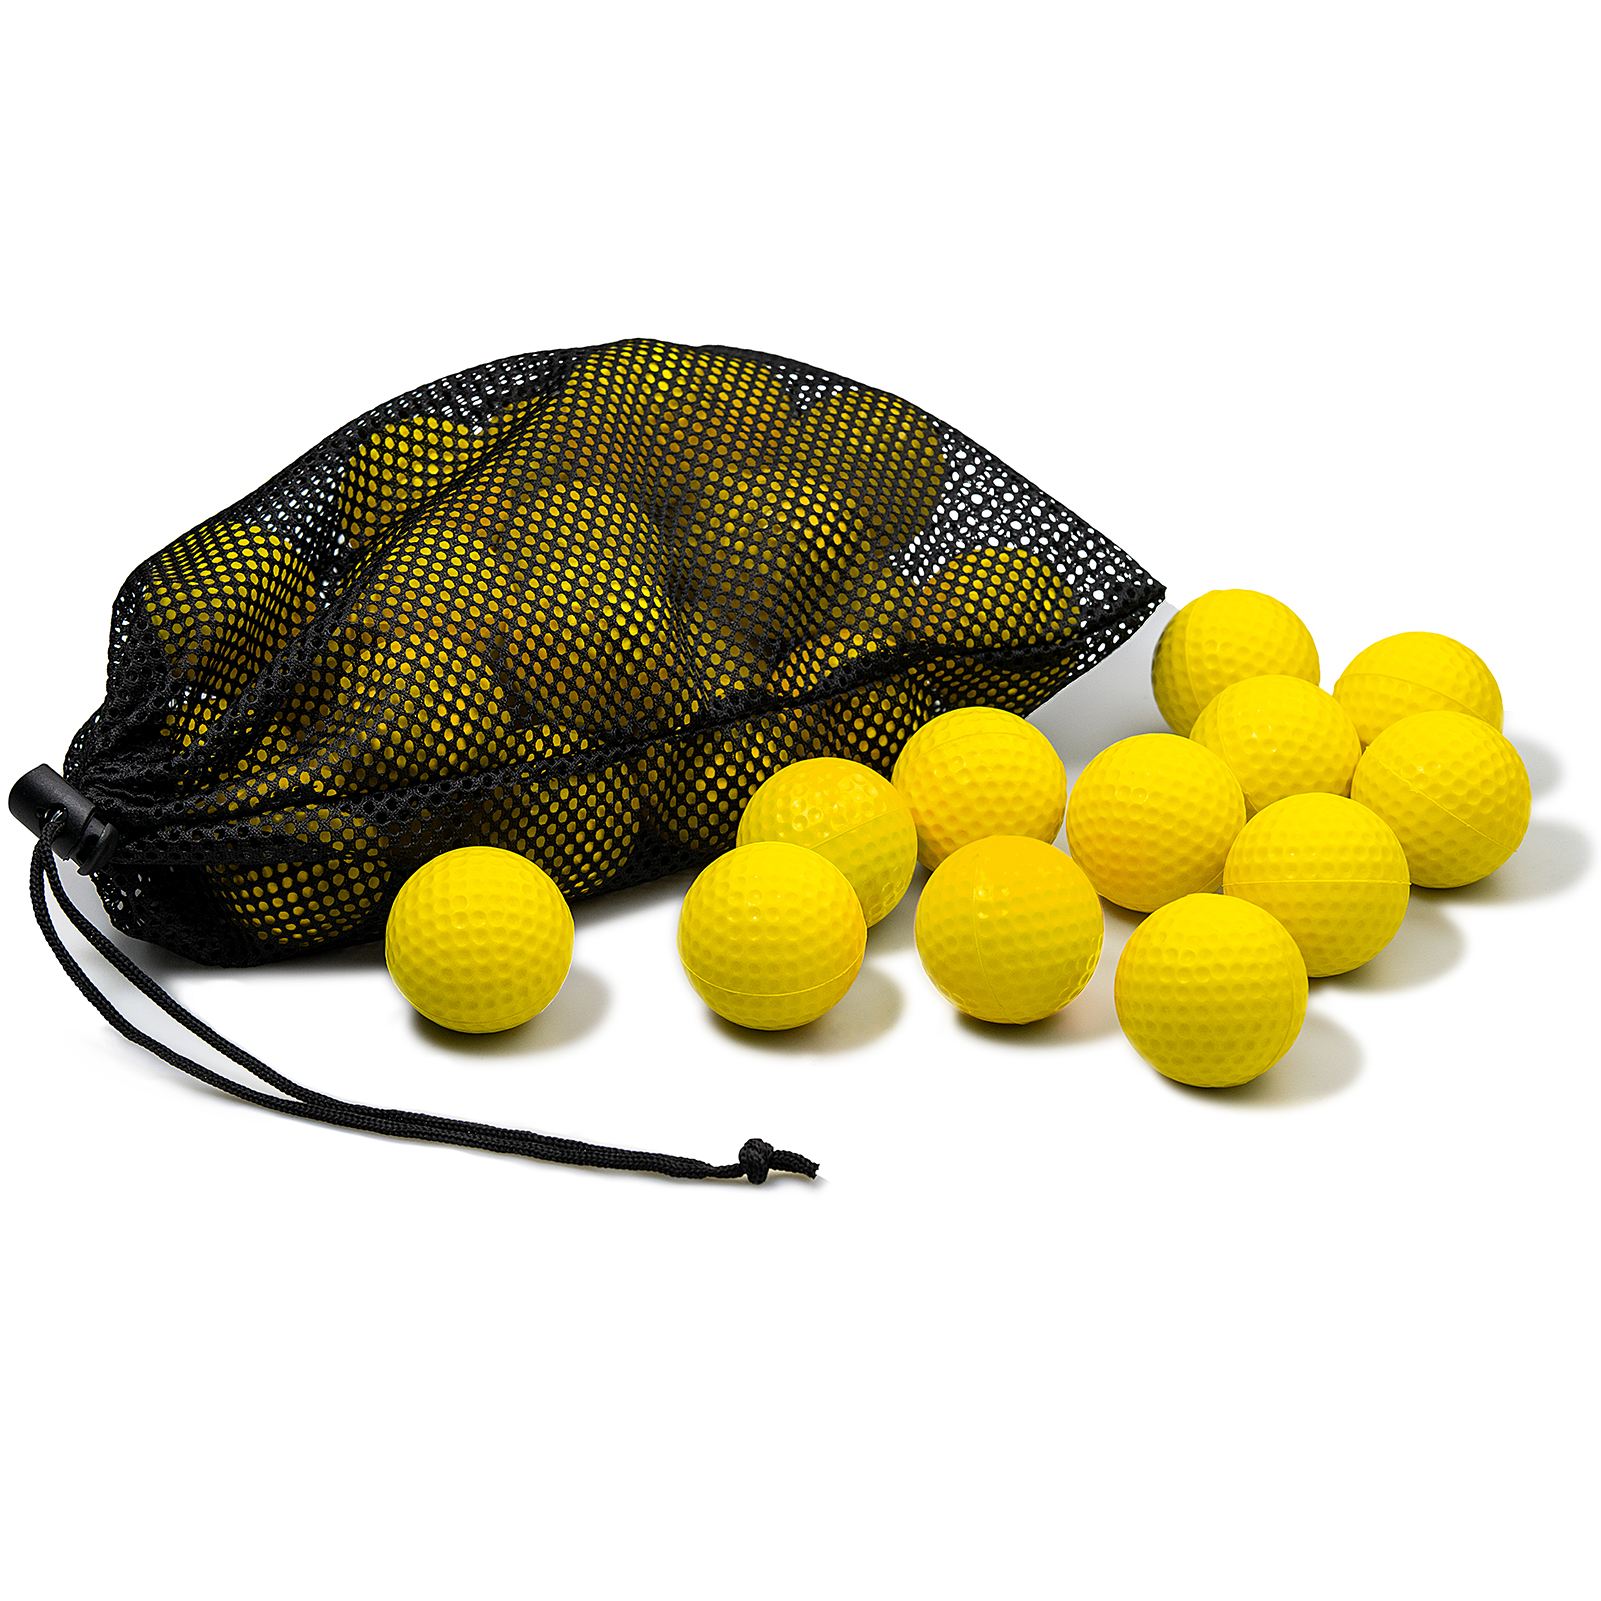 SAPLIZE 12 Pack Foam Golf Practice Balls, Realistic Feel and Limited Flight, Soft for Indoor or Outdoor Training, Yellow - image 1 of 7